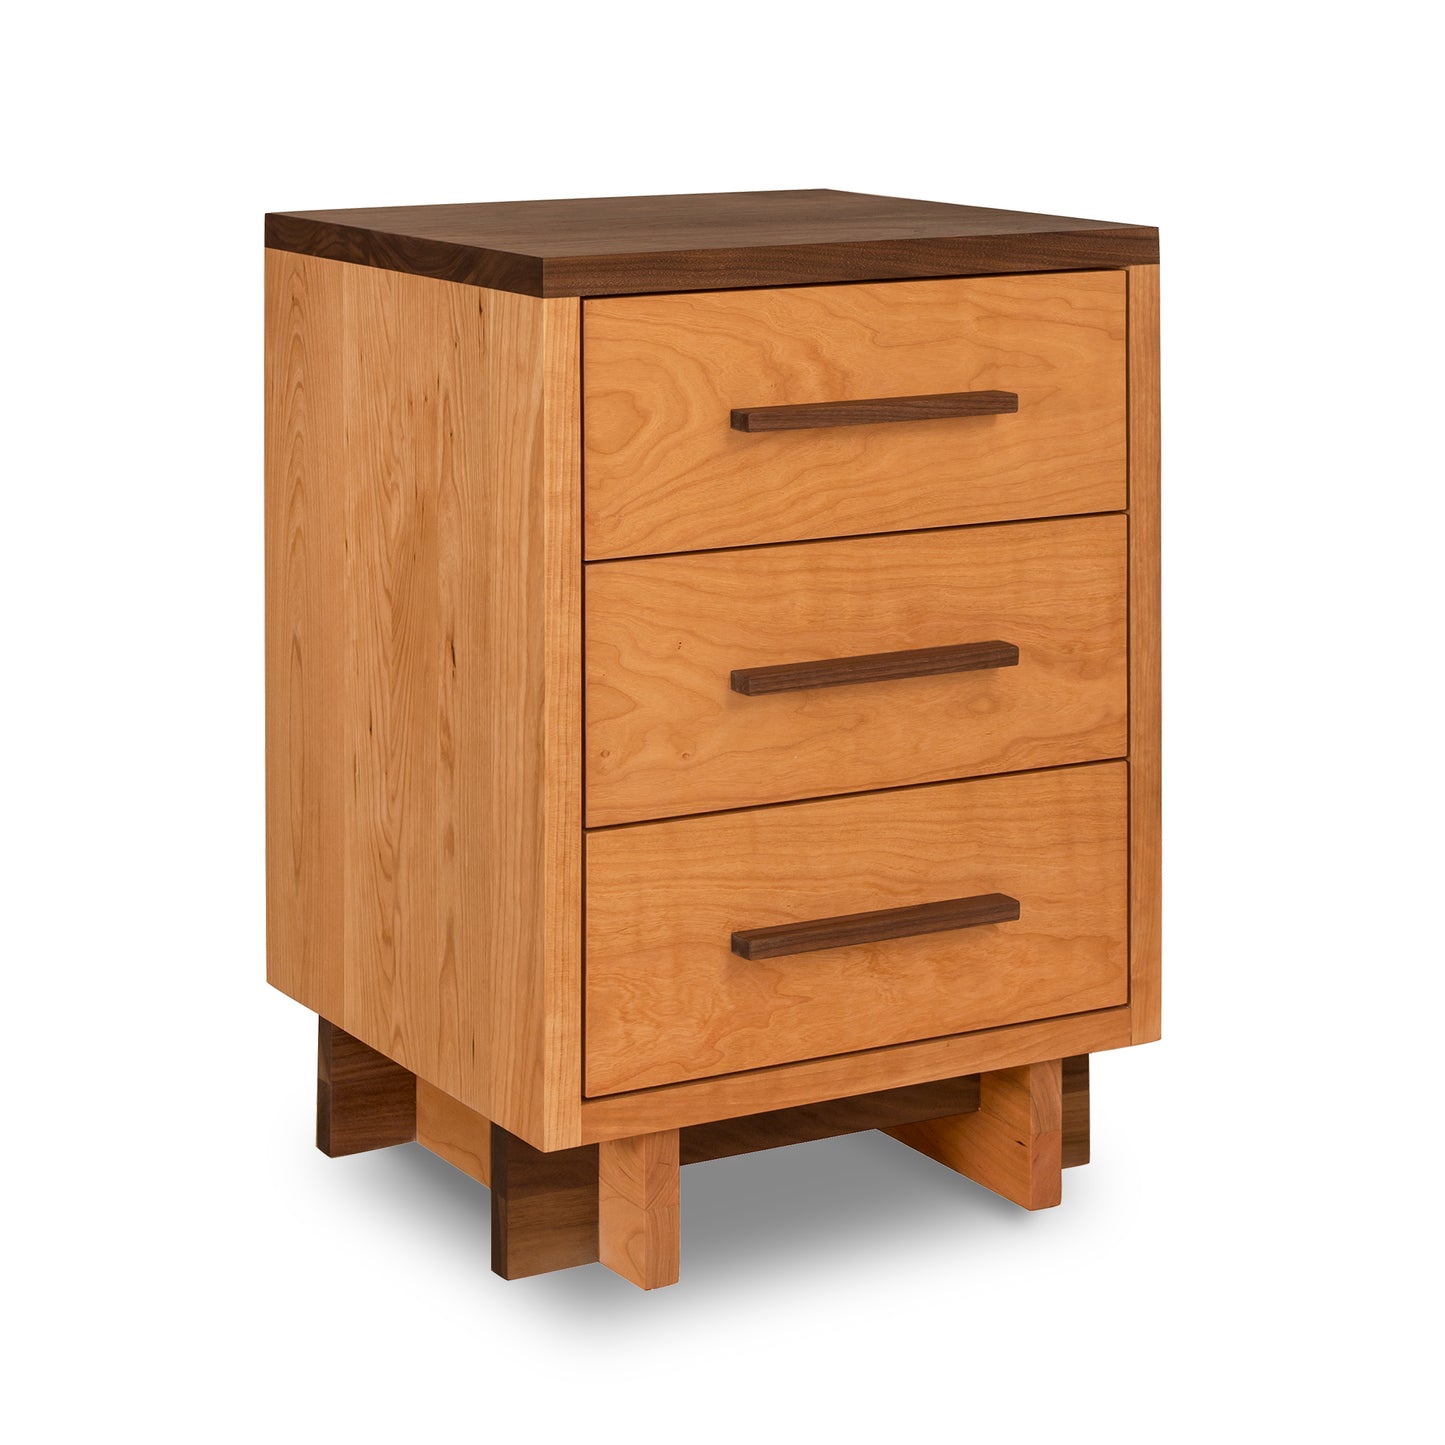 A Modern American 3-Drawer Nightstand by Vermont Furniture Designs, perfect for a luxury bedroom.